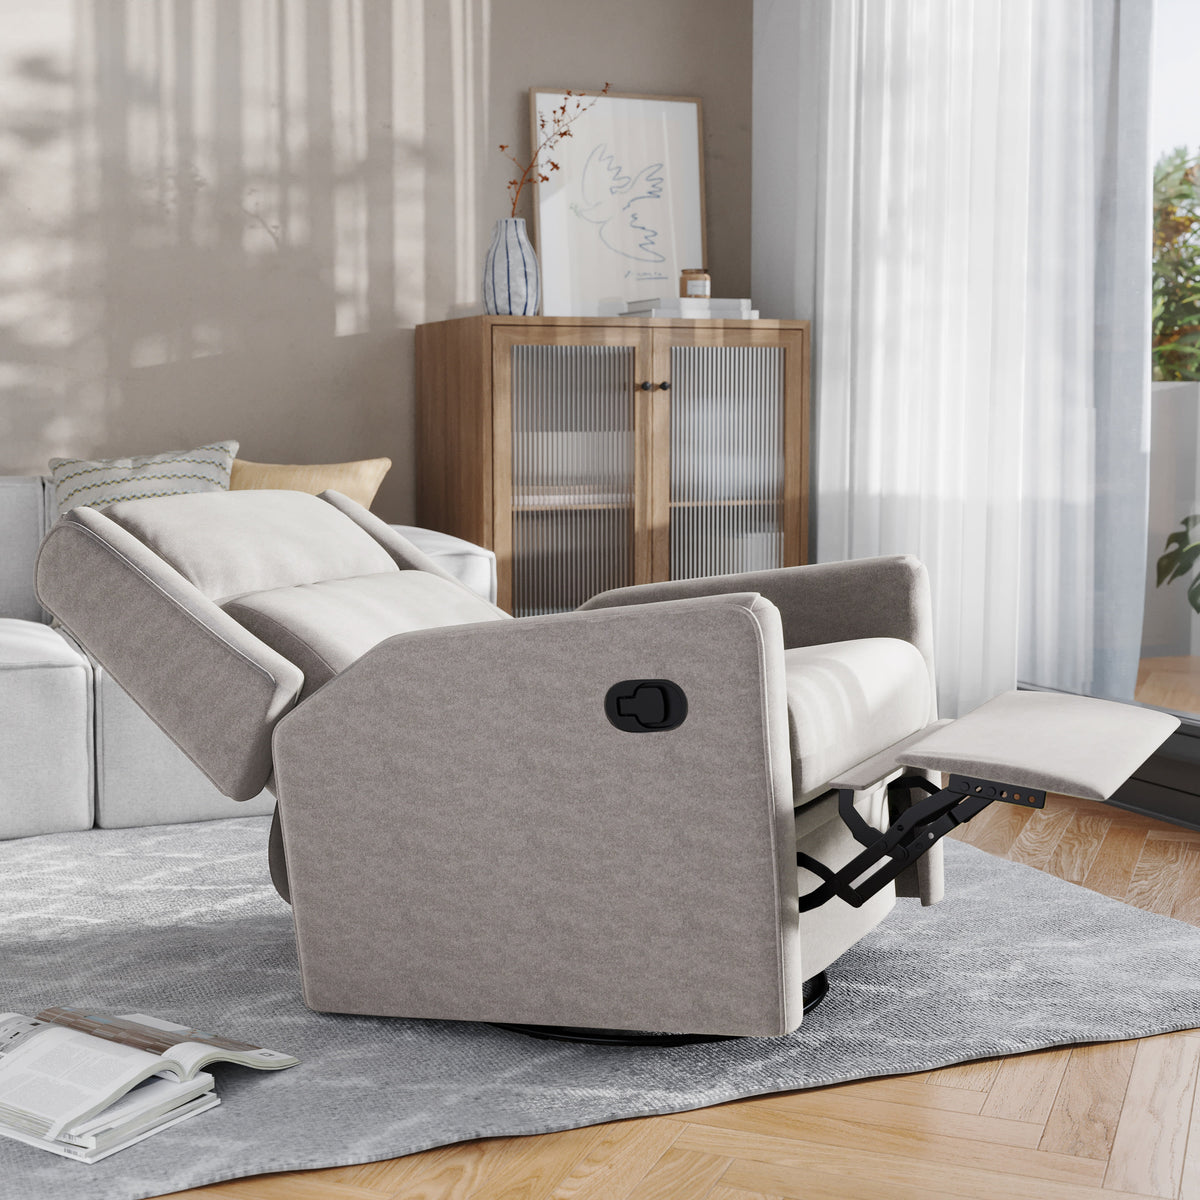 Light Gray |#| Manual Rocking Recliner Chair with 360° Swivel and Gliding Motion in Light Gray